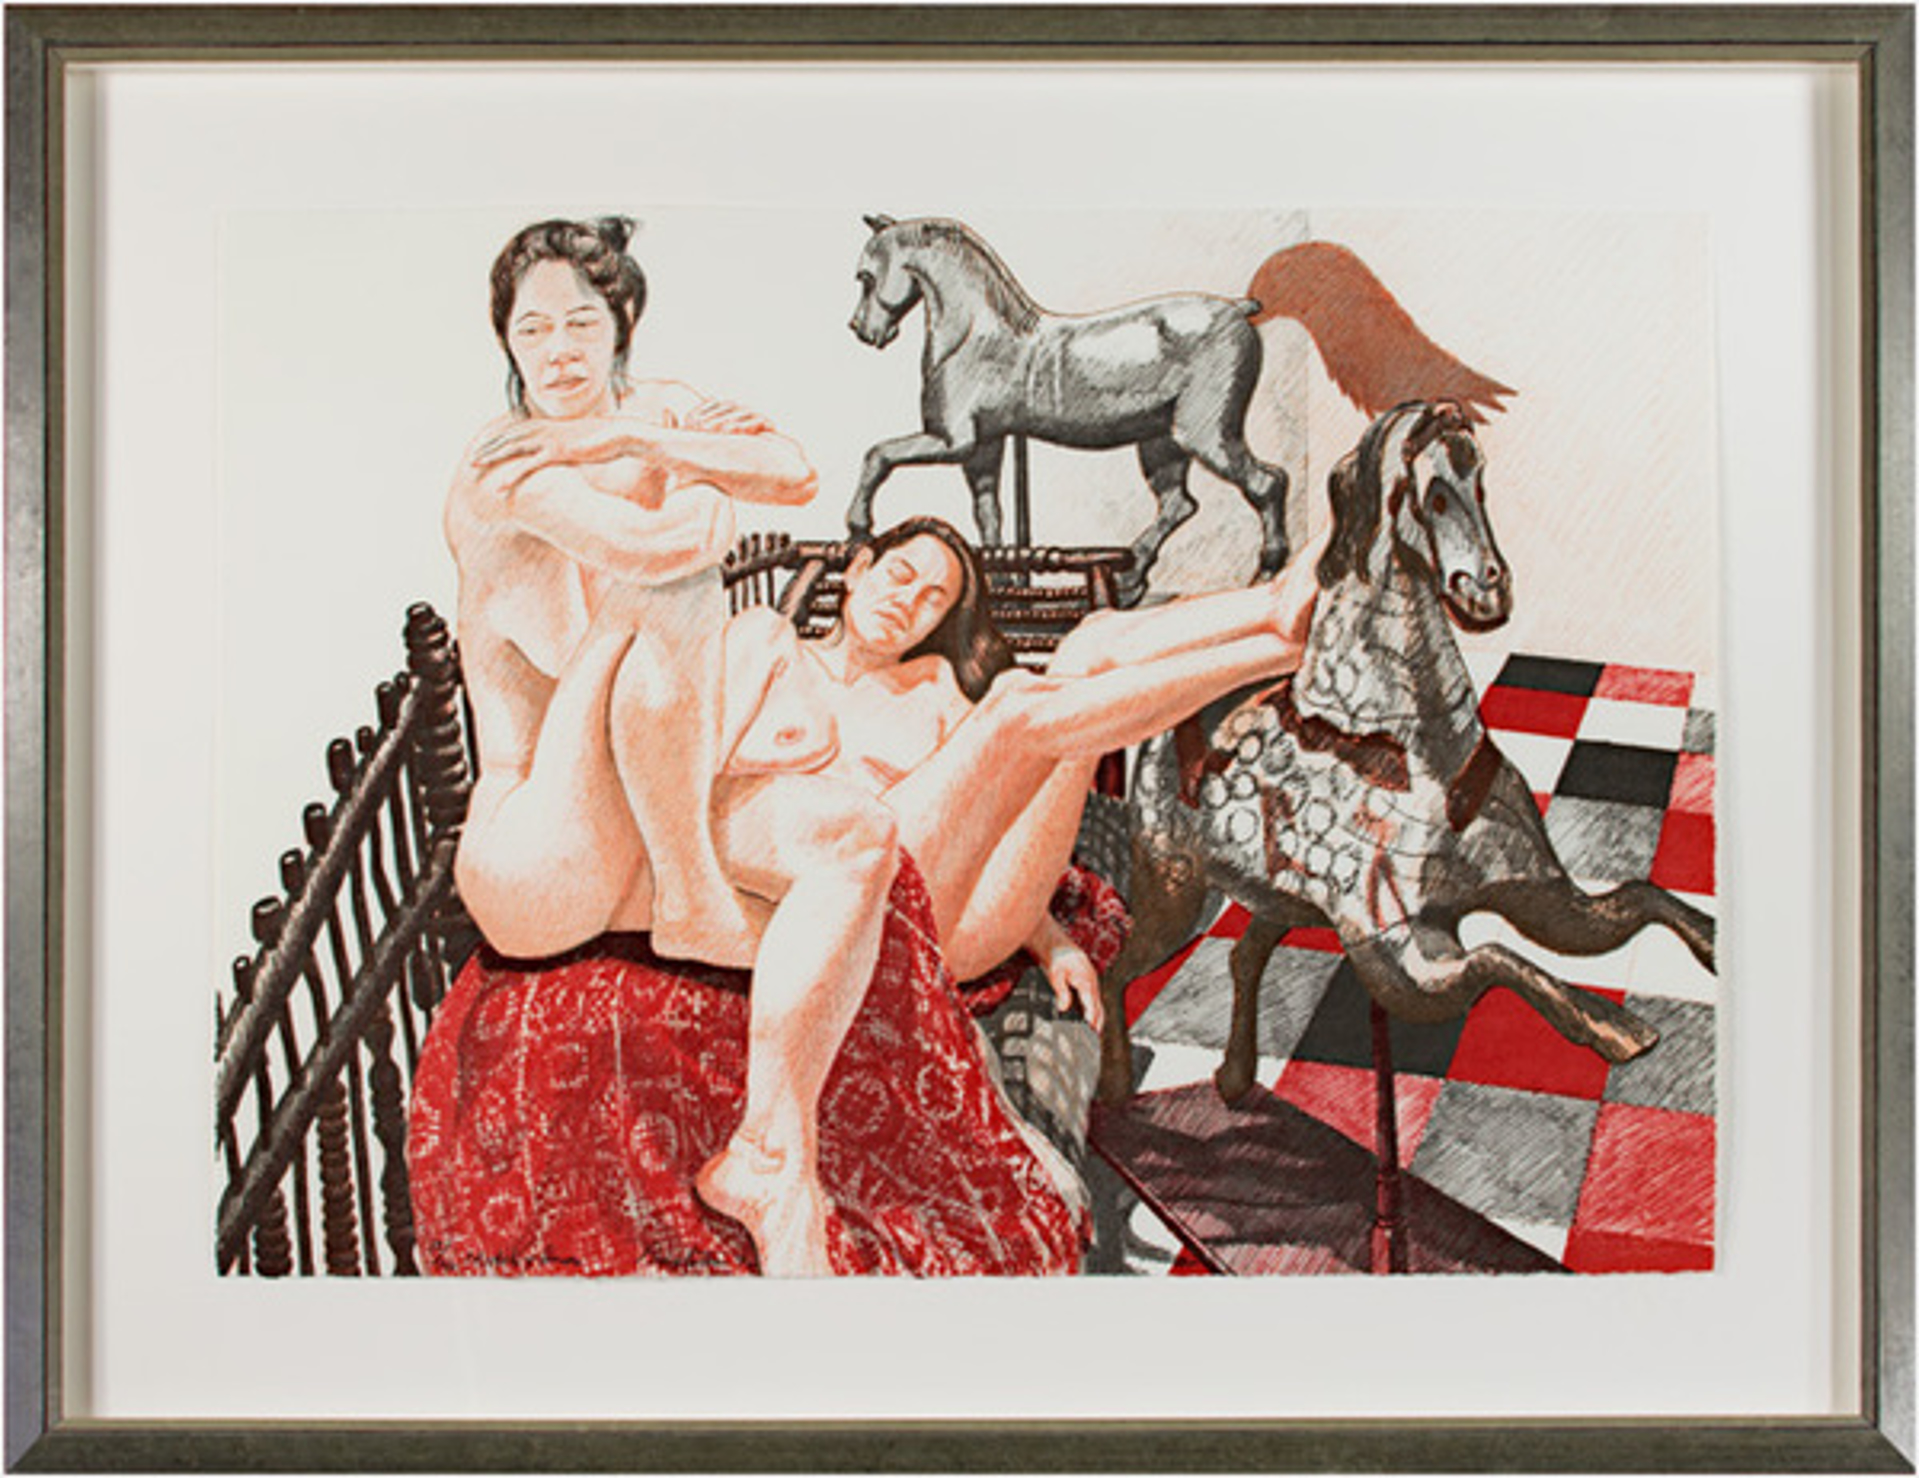 Models & Horses by Philip Pearlstein